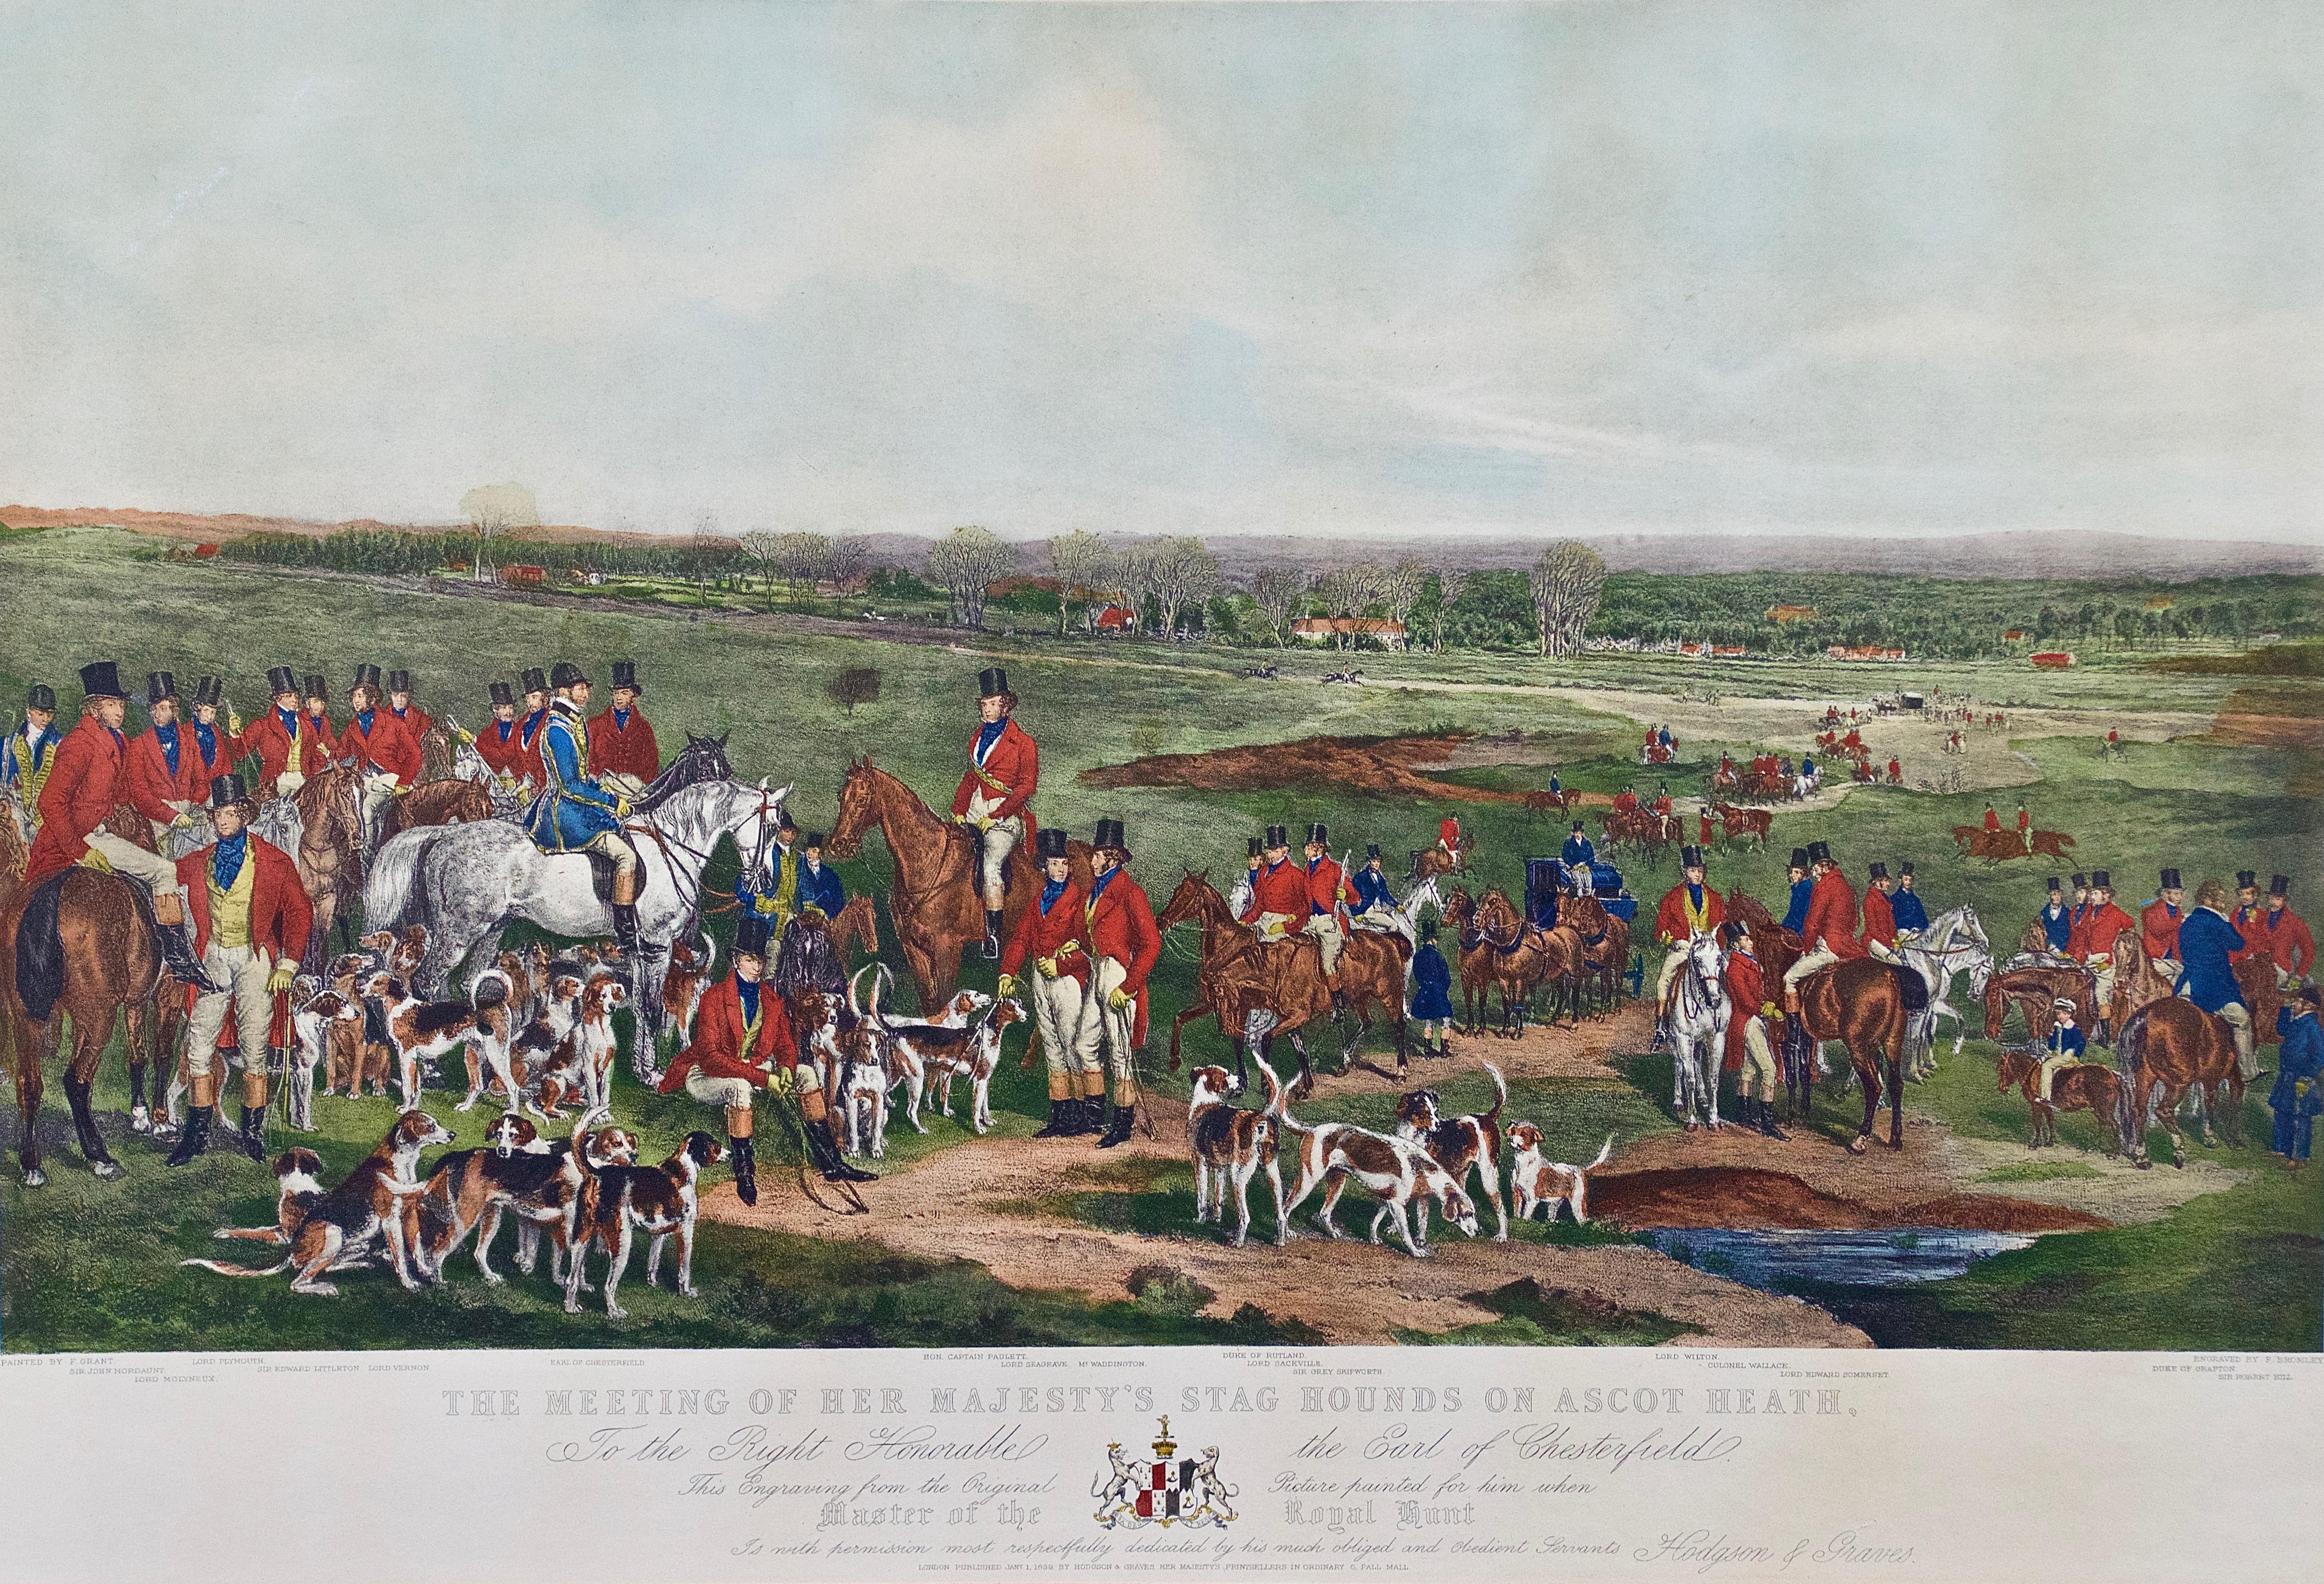 Her Majesty's Stag Hounds on Ascot, A Colored 19th Century British Hunting Scene - Print by Francis Grant 